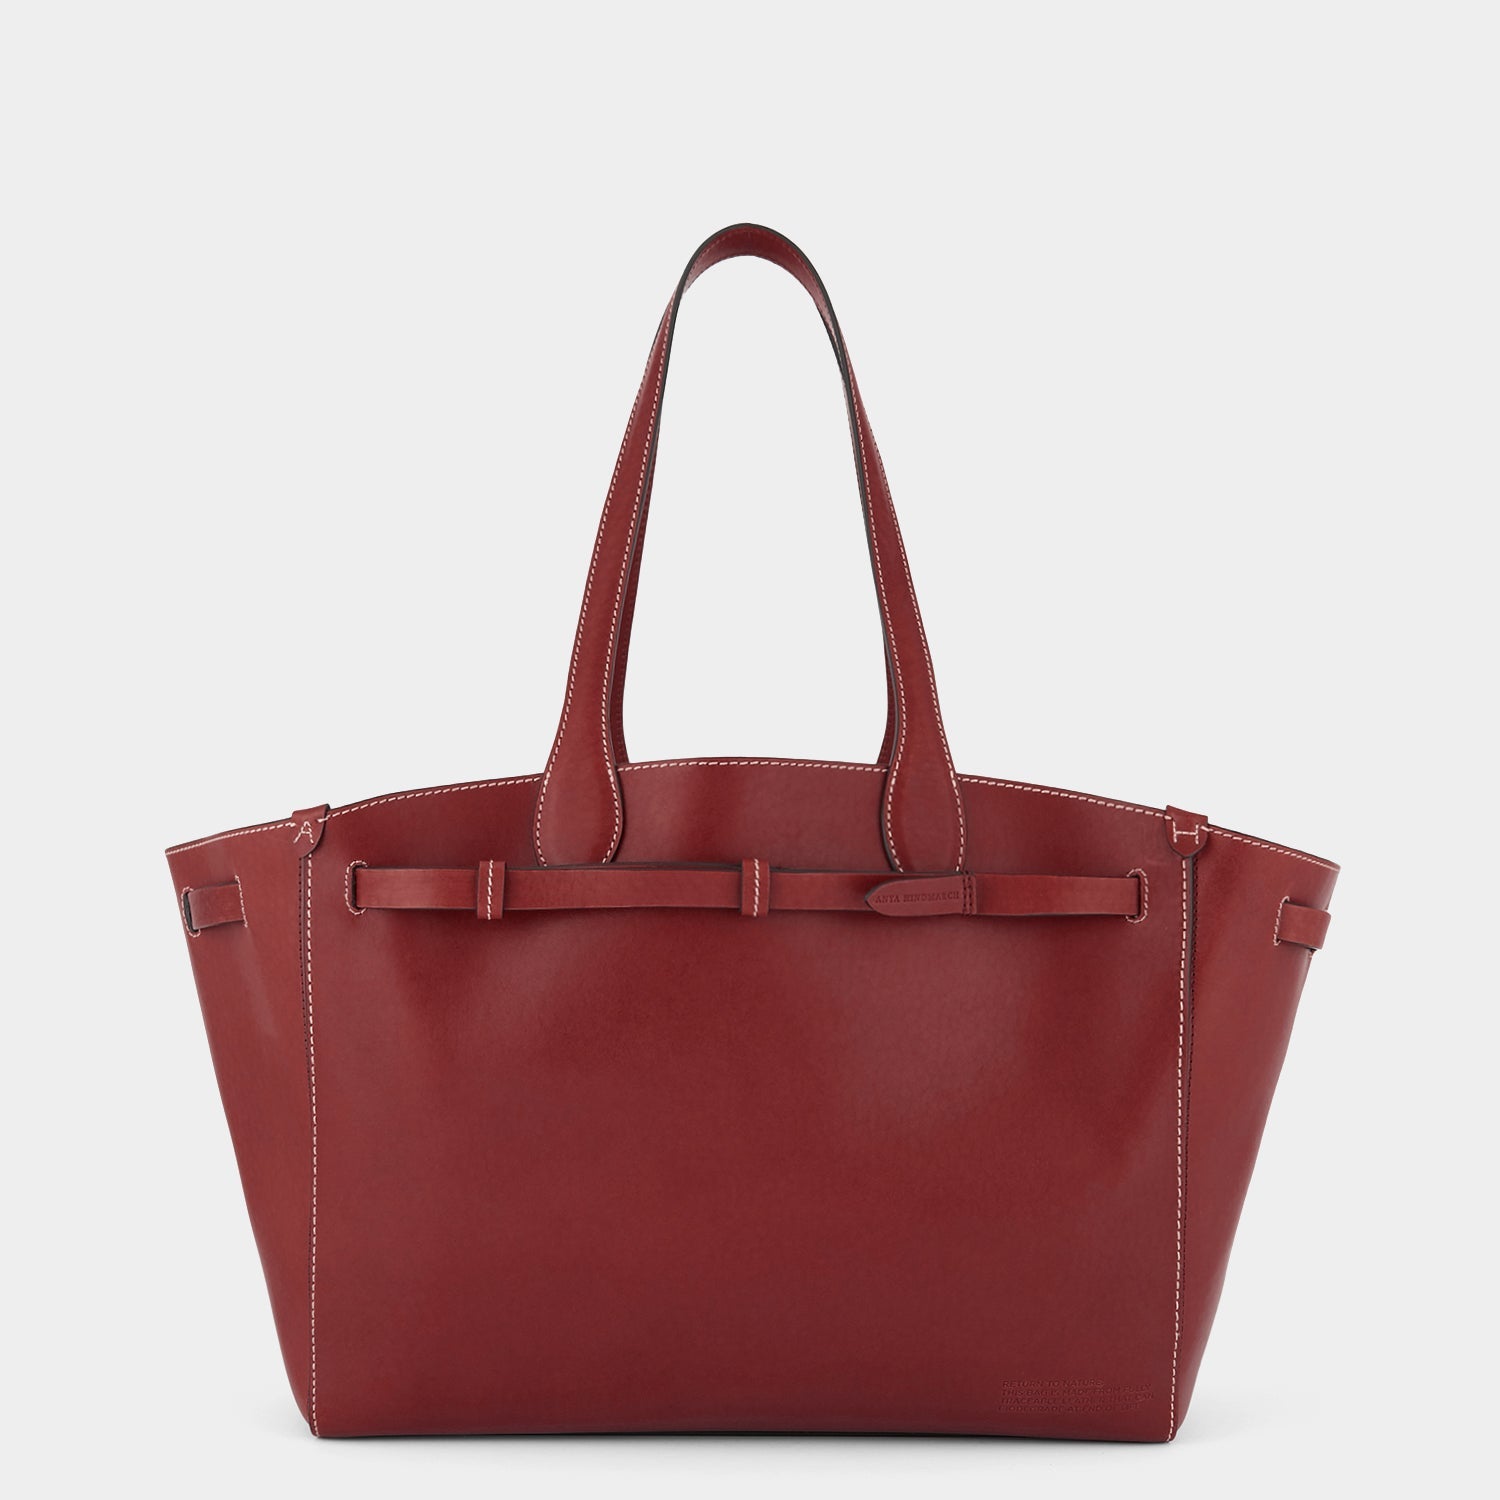 Return to Nature Tote -

                  
                    Compostable Leather in Rosewood -
                  

                  Anya Hindmarch US
